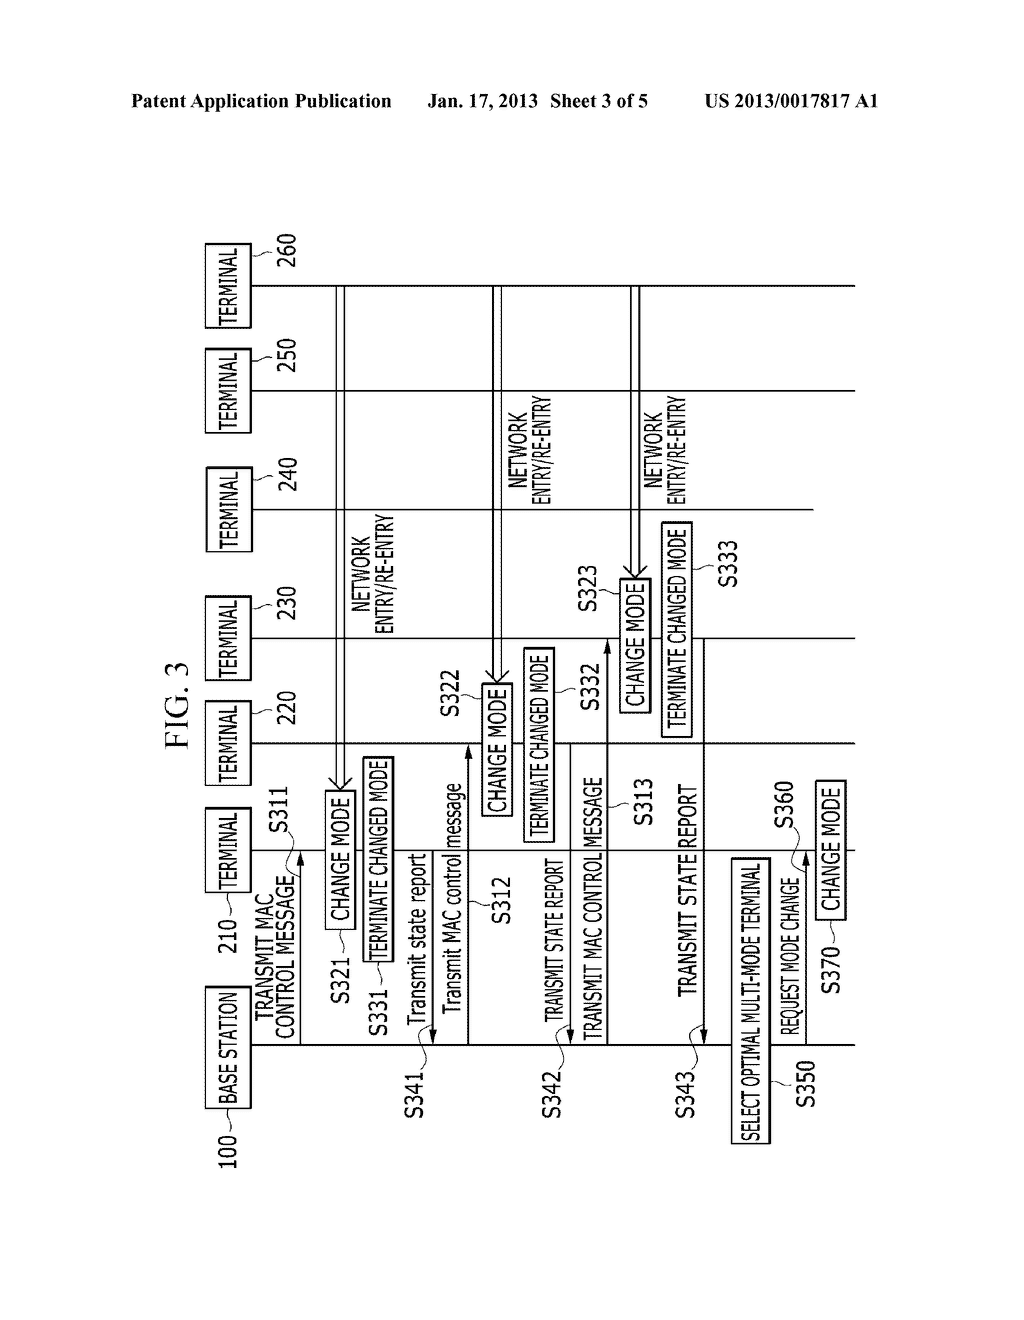 METHOD FOR COMMUNICATION OF BASE STATION AND TERMINALAANM Kim; Won-IkAACI DaejeonAACO KRAAGP Kim; Won-Ik Daejeon KRAANM Kim; EunkyungAACI DaejeonAACO KRAAGP Kim; Eunkyung Daejeon KRAANM Kim; Sung KyungAACI DaejeonAACO KRAAGP Kim; Sung Kyung Daejeon KRAANM Chang; Sung CheolAACI DaejeonAACO KRAAGP Chang; Sung Cheol Daejeon KRAANM Cha; Jae SunAACI DaejeonAACO KRAAGP Cha; Jae Sun Daejeon KRAANM Yun; Mi YoungAACI DaejeonAACO KRAAGP Yun; Mi Young Daejeon KRAANM Lee; HyunAACI DaejeonAACO KRAAGP Lee; Hyun Daejeon KRAANM Yoon; Chul SikAACI SeoulAACO KRAAGP Yoon; Chul Sik Seoul KRAANM Lim; Kwang JaeAACI DaejeonAACO KRAAGP Lim; Kwang Jae Daejeon KR - diagram, schematic, and image 04